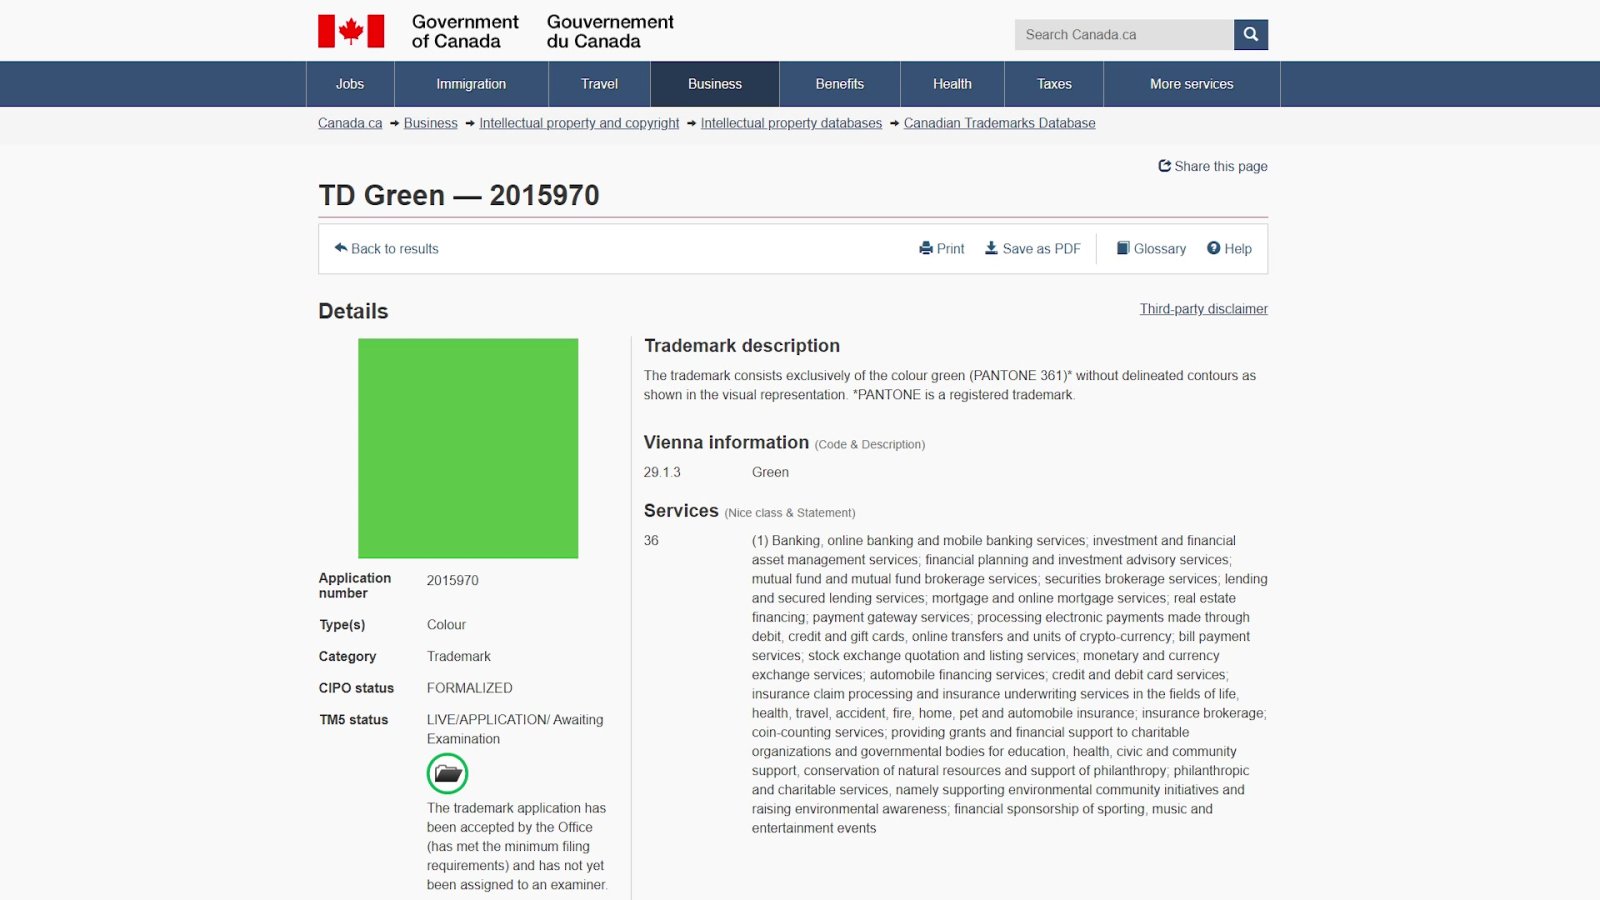 Screenshot of TD Bank’s application for a colour trademark.